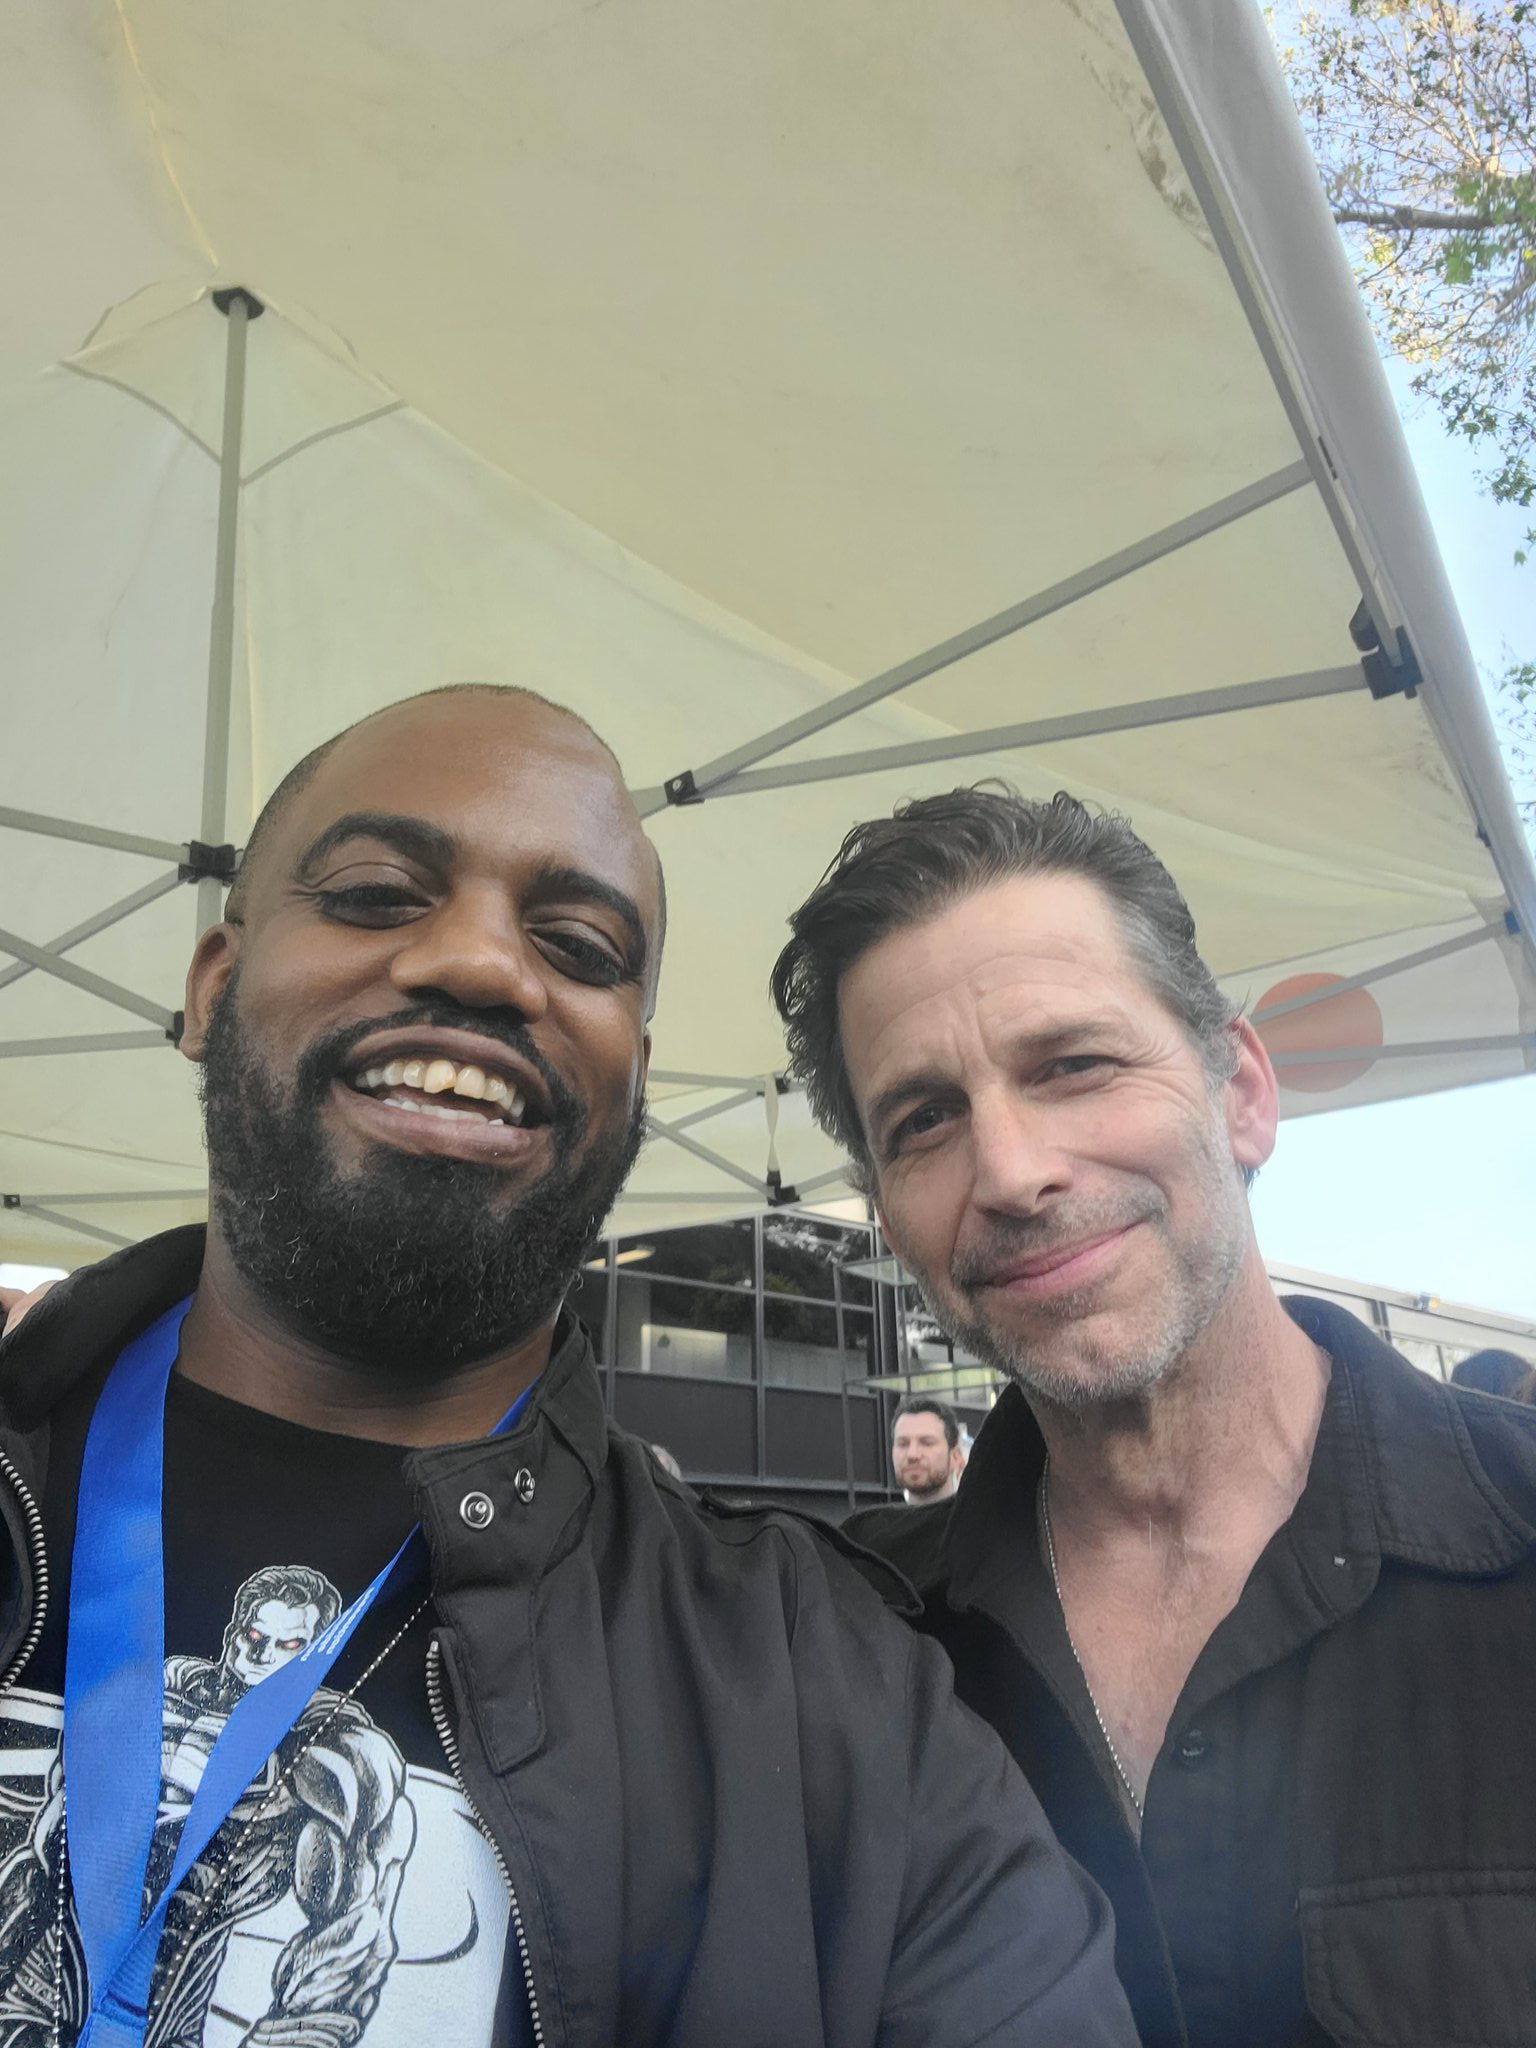 Justice League 2: Zack Snyder Compliments Sell To Netflix Campaign